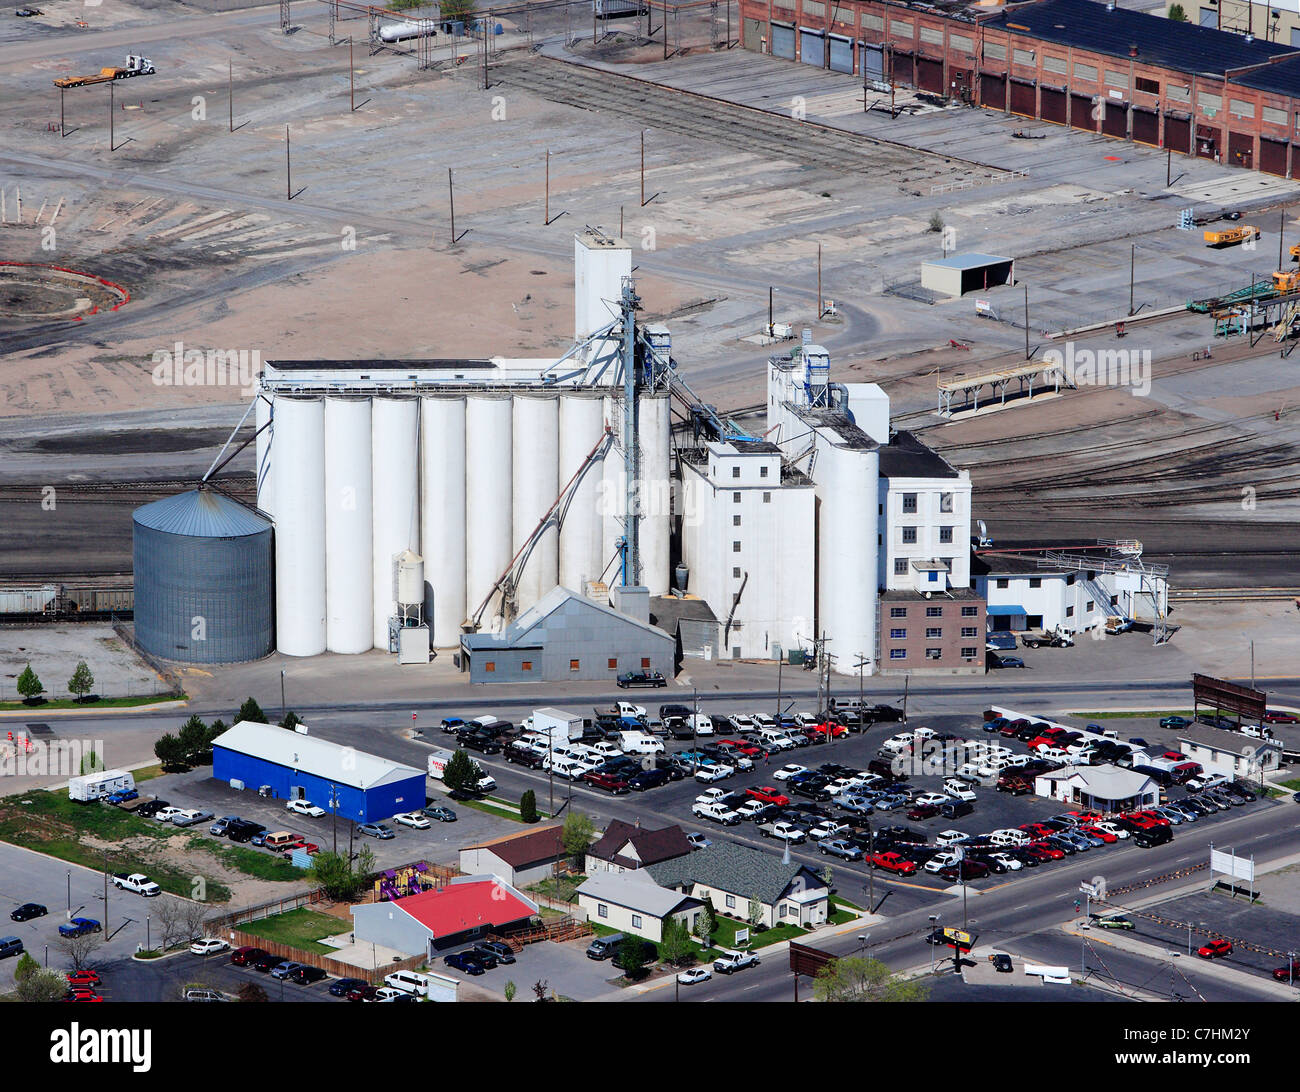 An aerial view of grain elevators Stock Photo